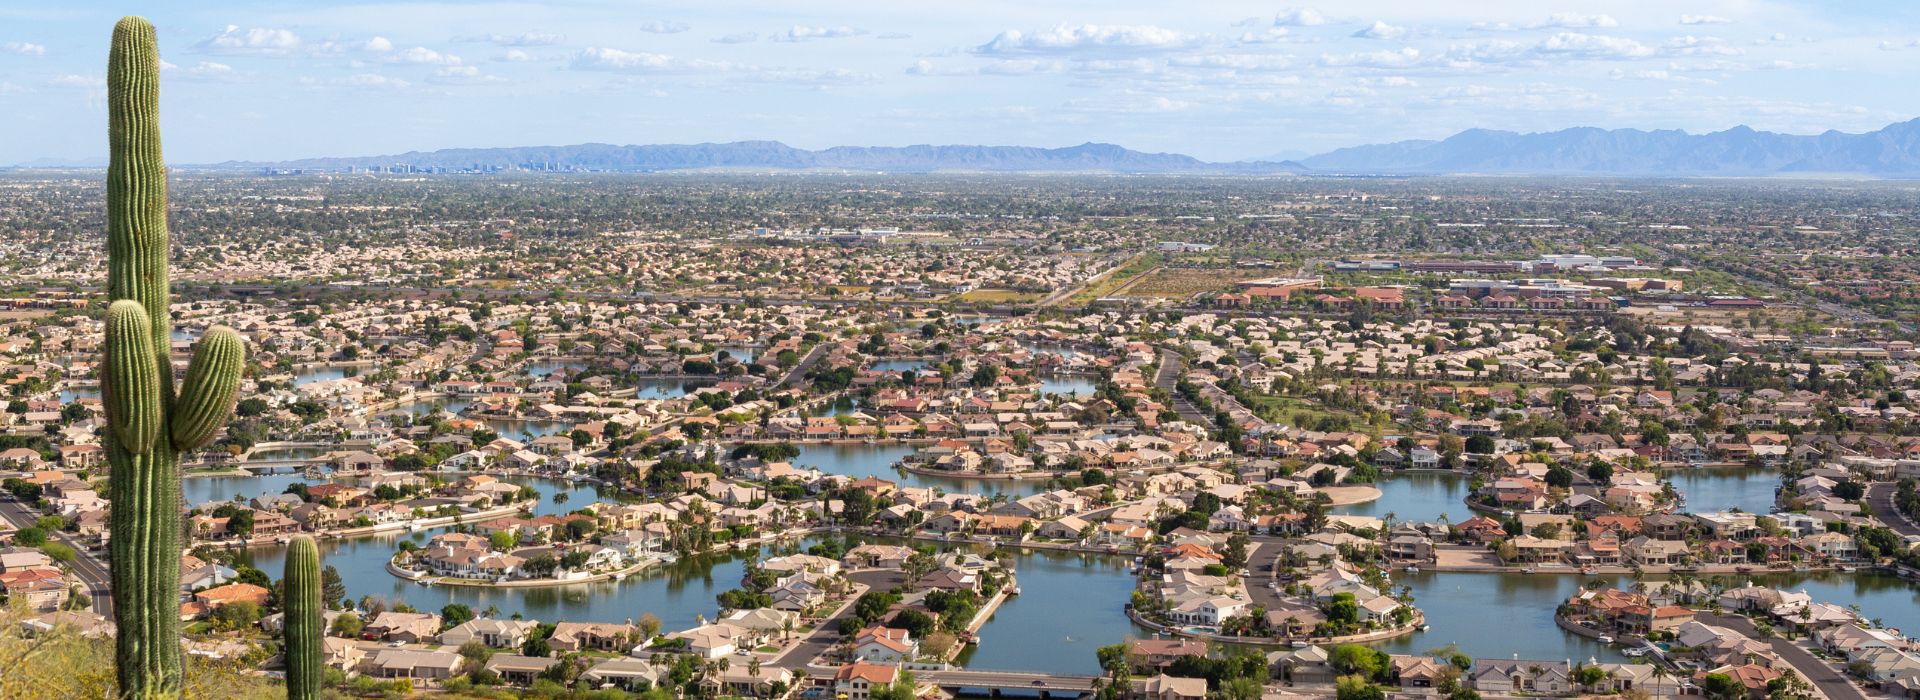 Panoramic view of Glendale, Arizona, showcasing a suburban landscape with terracotta-roofed houses.